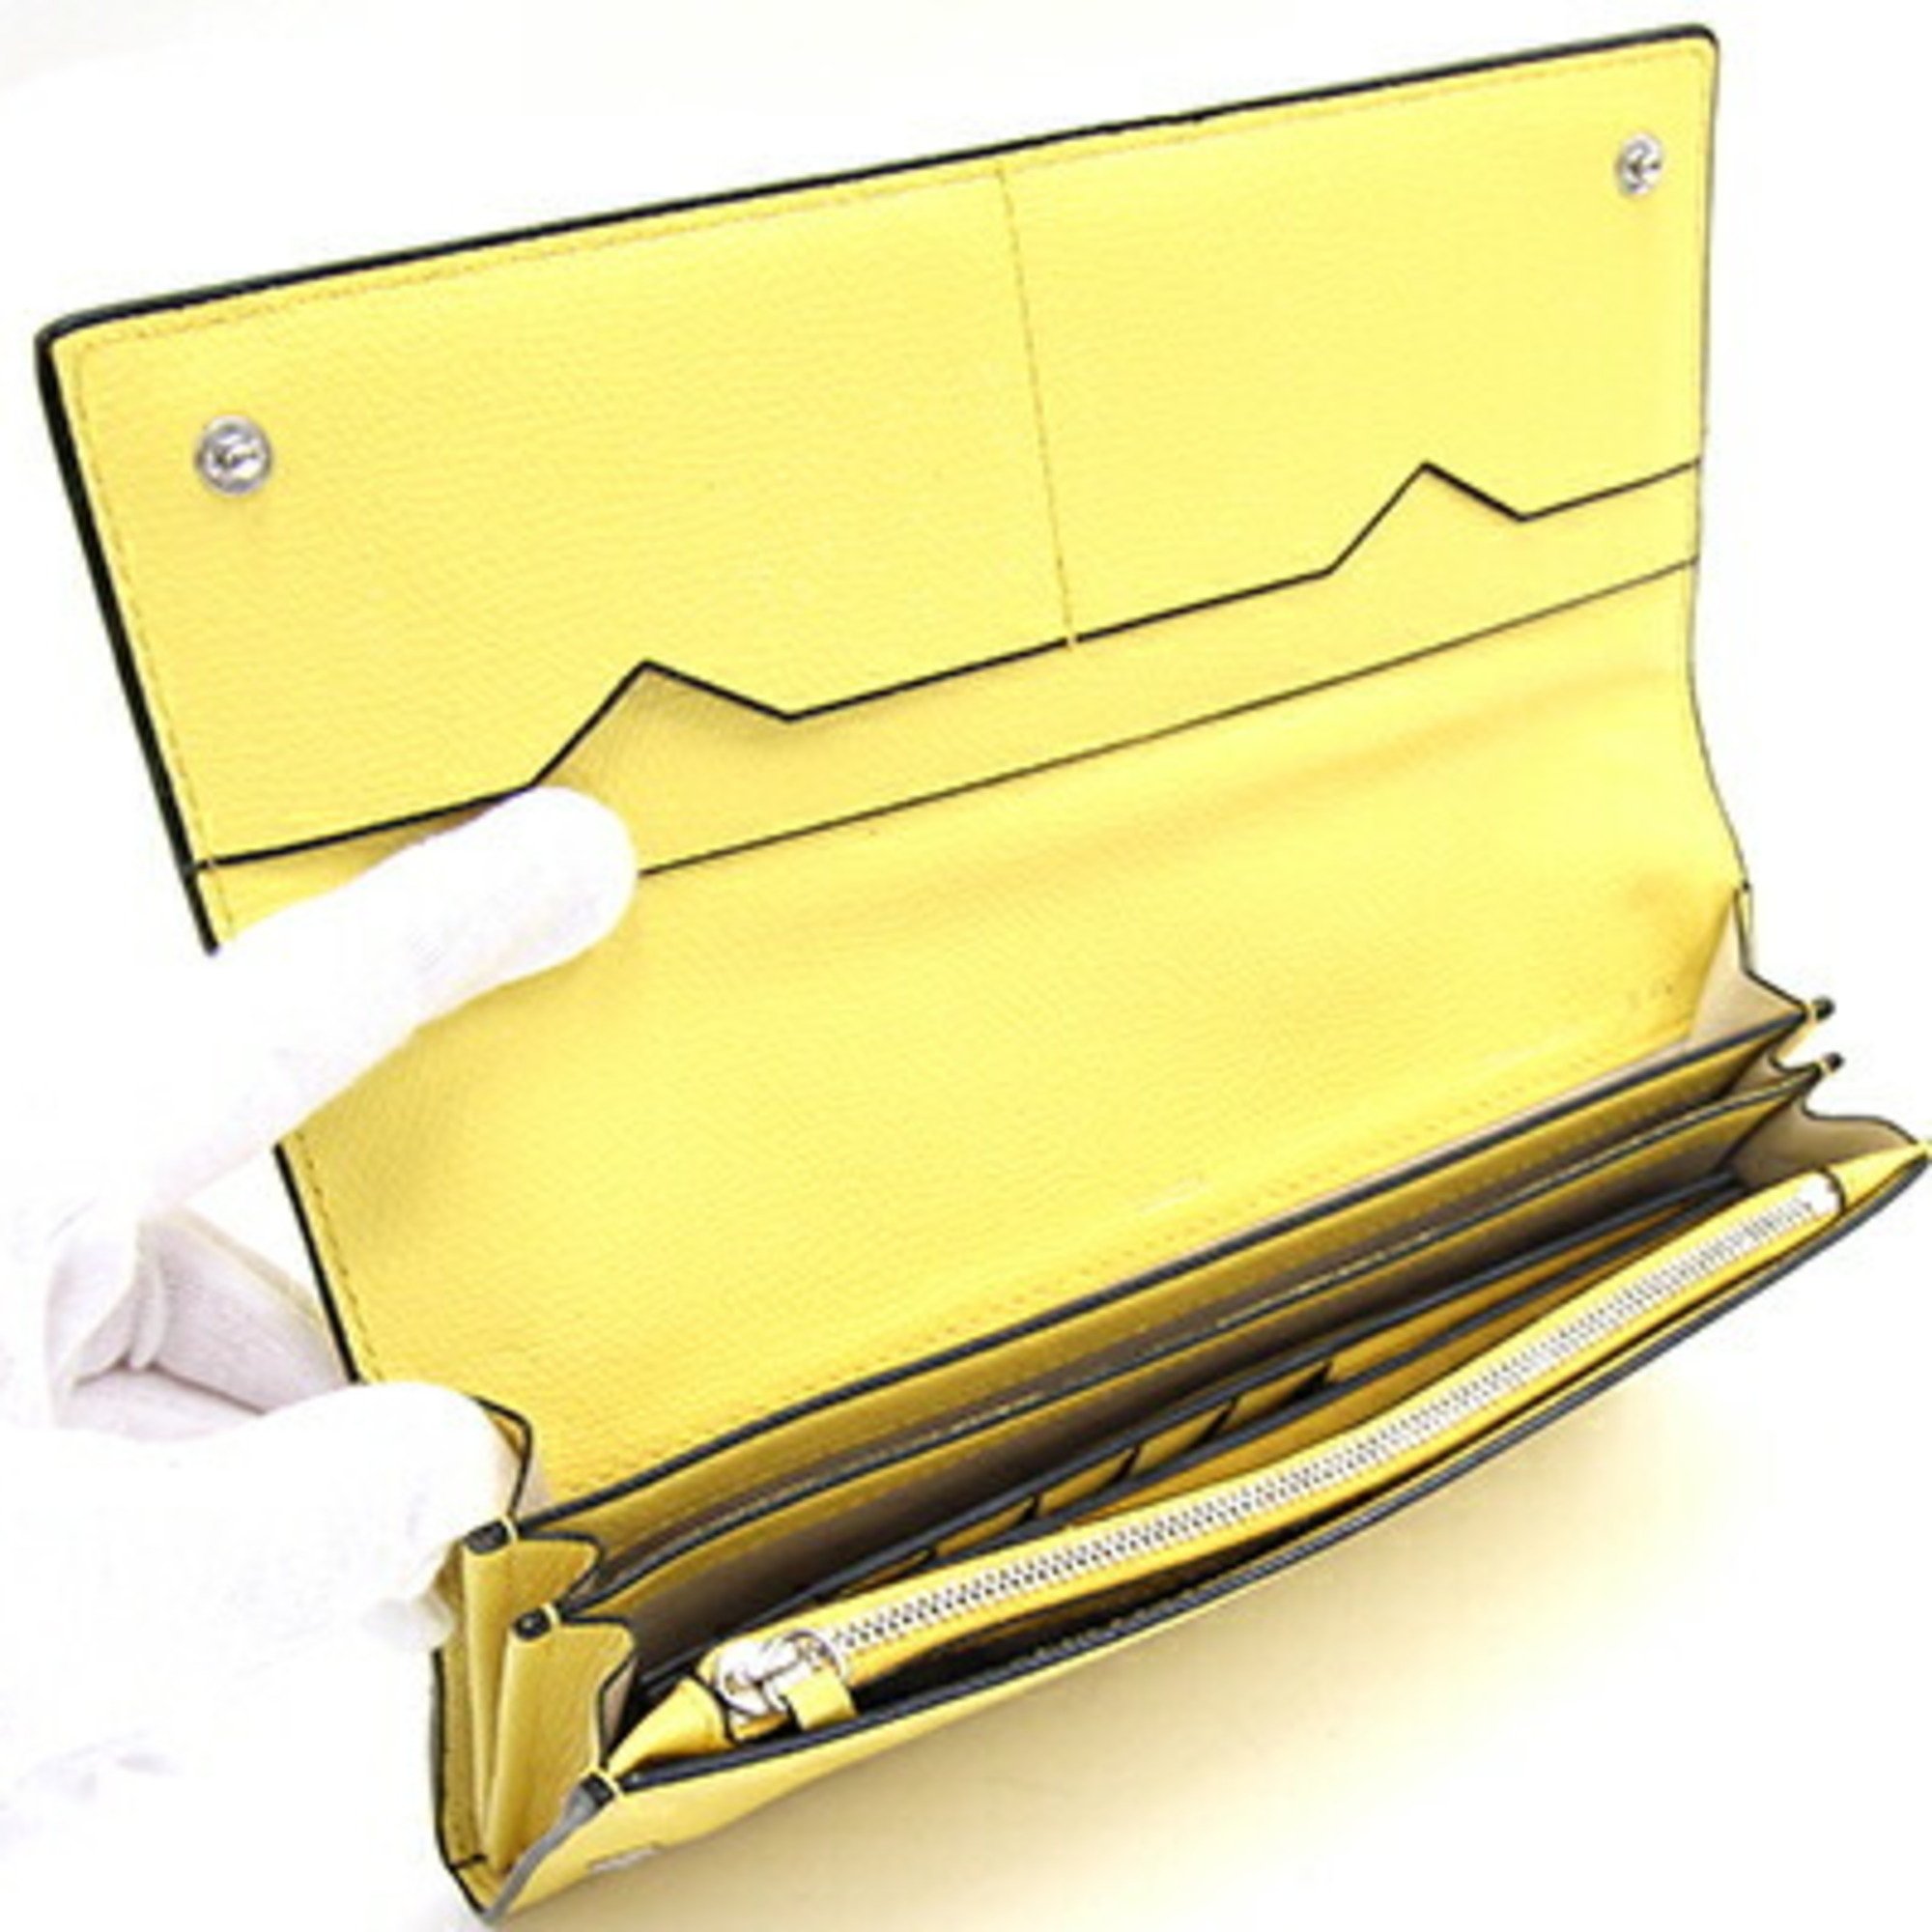 Valextra Bi-fold Long Wallet with Coin Purse 12 Cards V9L15-028 Yellow Leather Women's